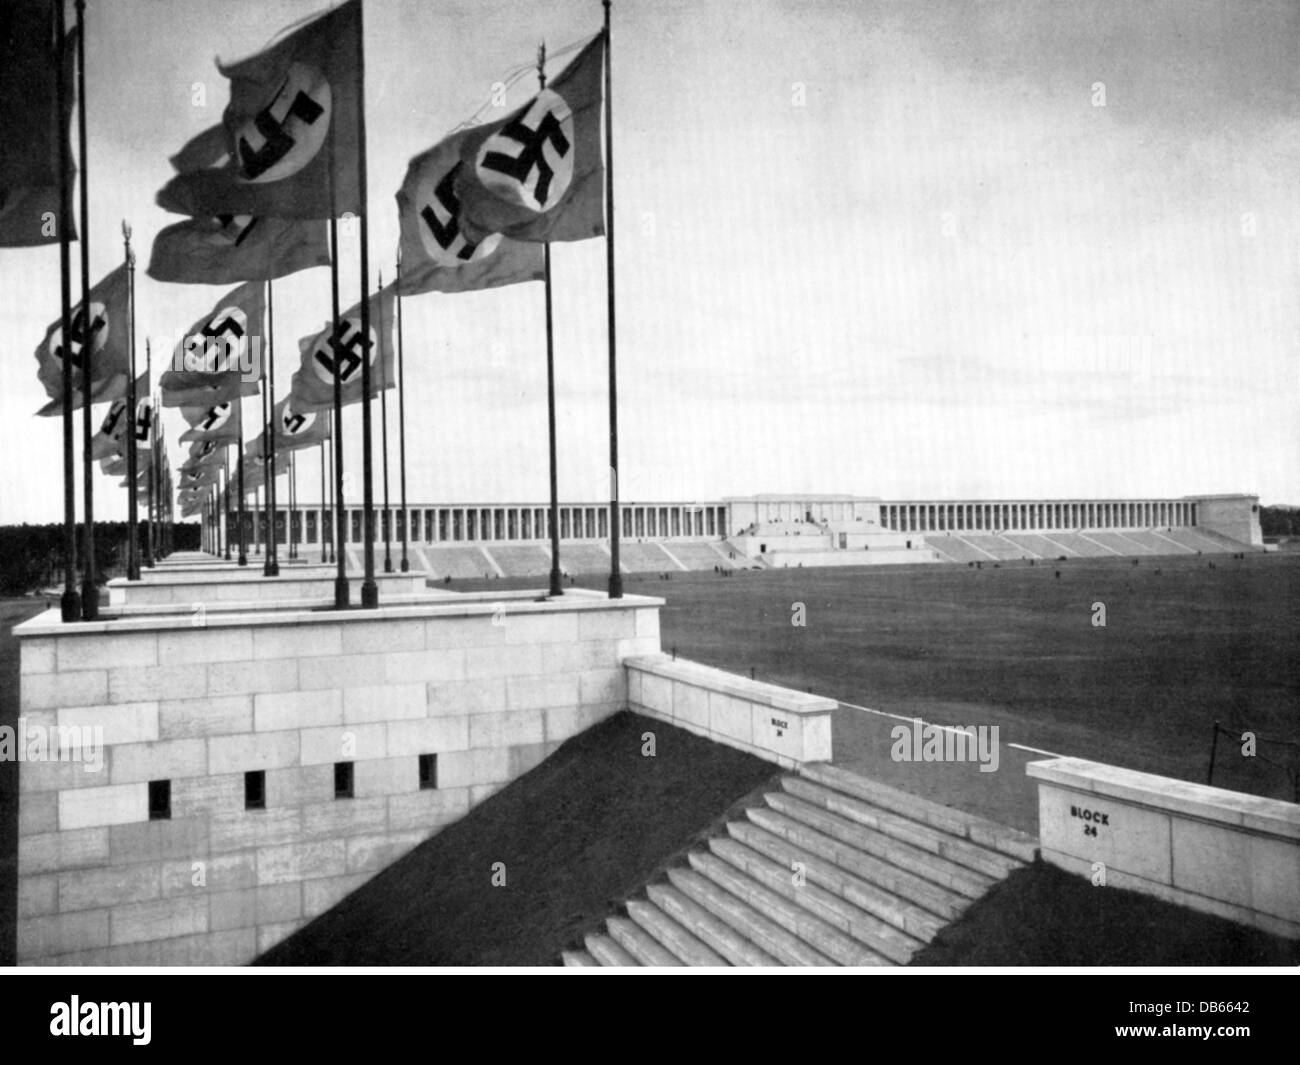 National Socialism, architecture, grandstand of Zeppelin Field, Reichsparteitagsgelaende (Nazi party rally grounds), Nurembenrg, built 1935 - 1937, architect: Albert Speer, view, 1937, flags, flag tower, swastika, building, Nazi Germany, German Reich, Third Reich, 1930s, 20th century, historic, historical, Additional-Rights-Clearences-Not Available Stock Photo